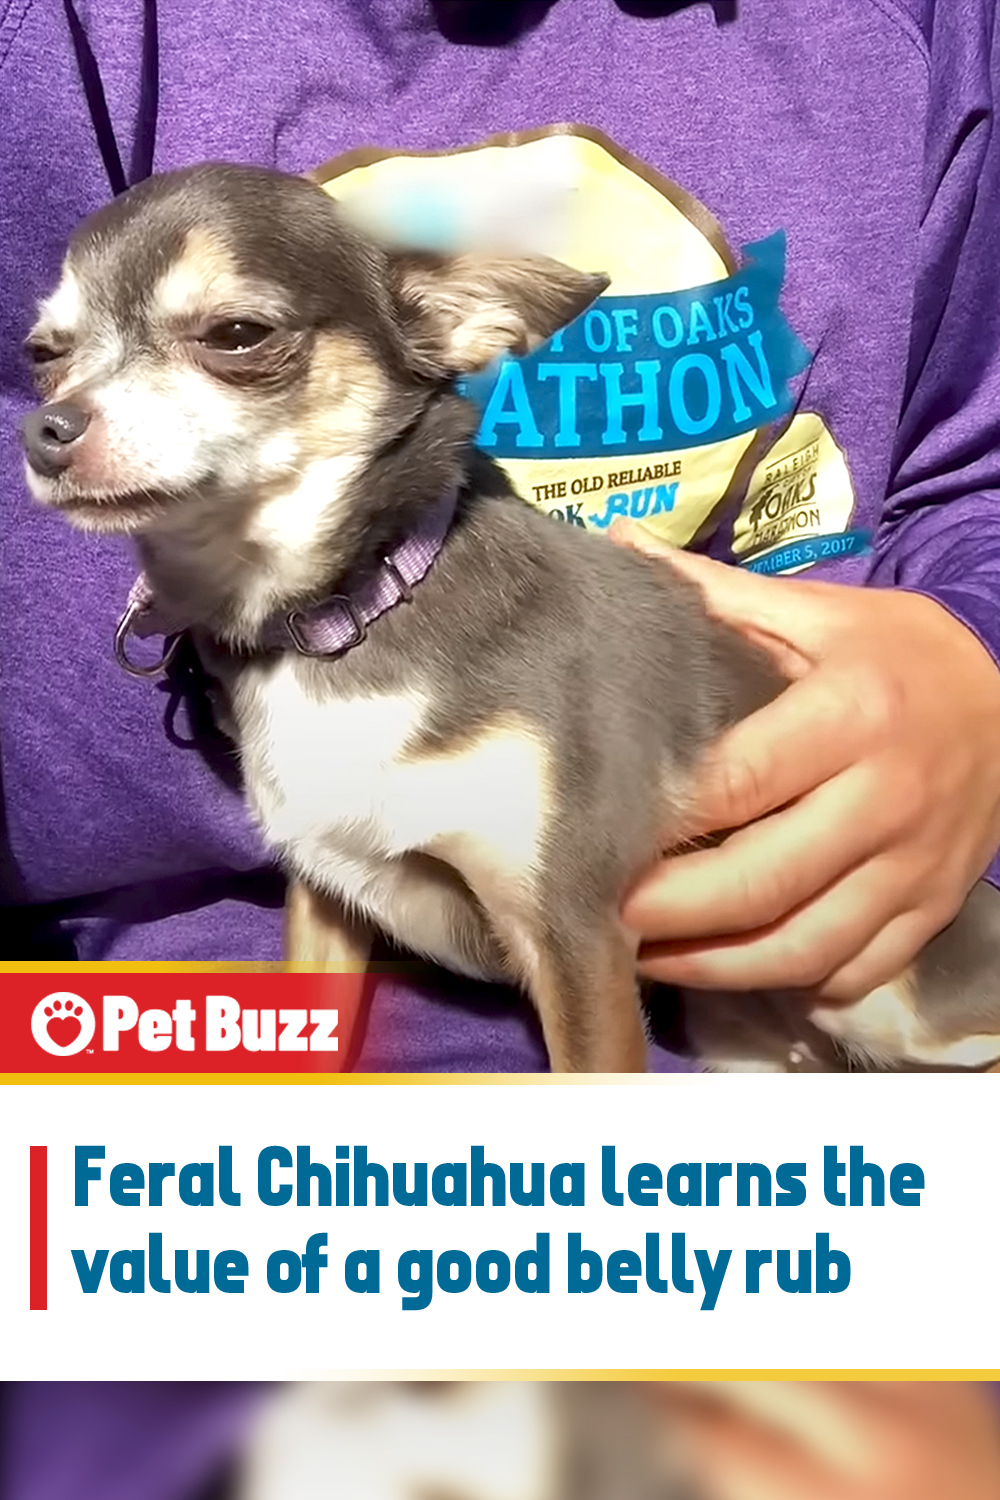 Feral Chihuahua learns the value of a good belly rub